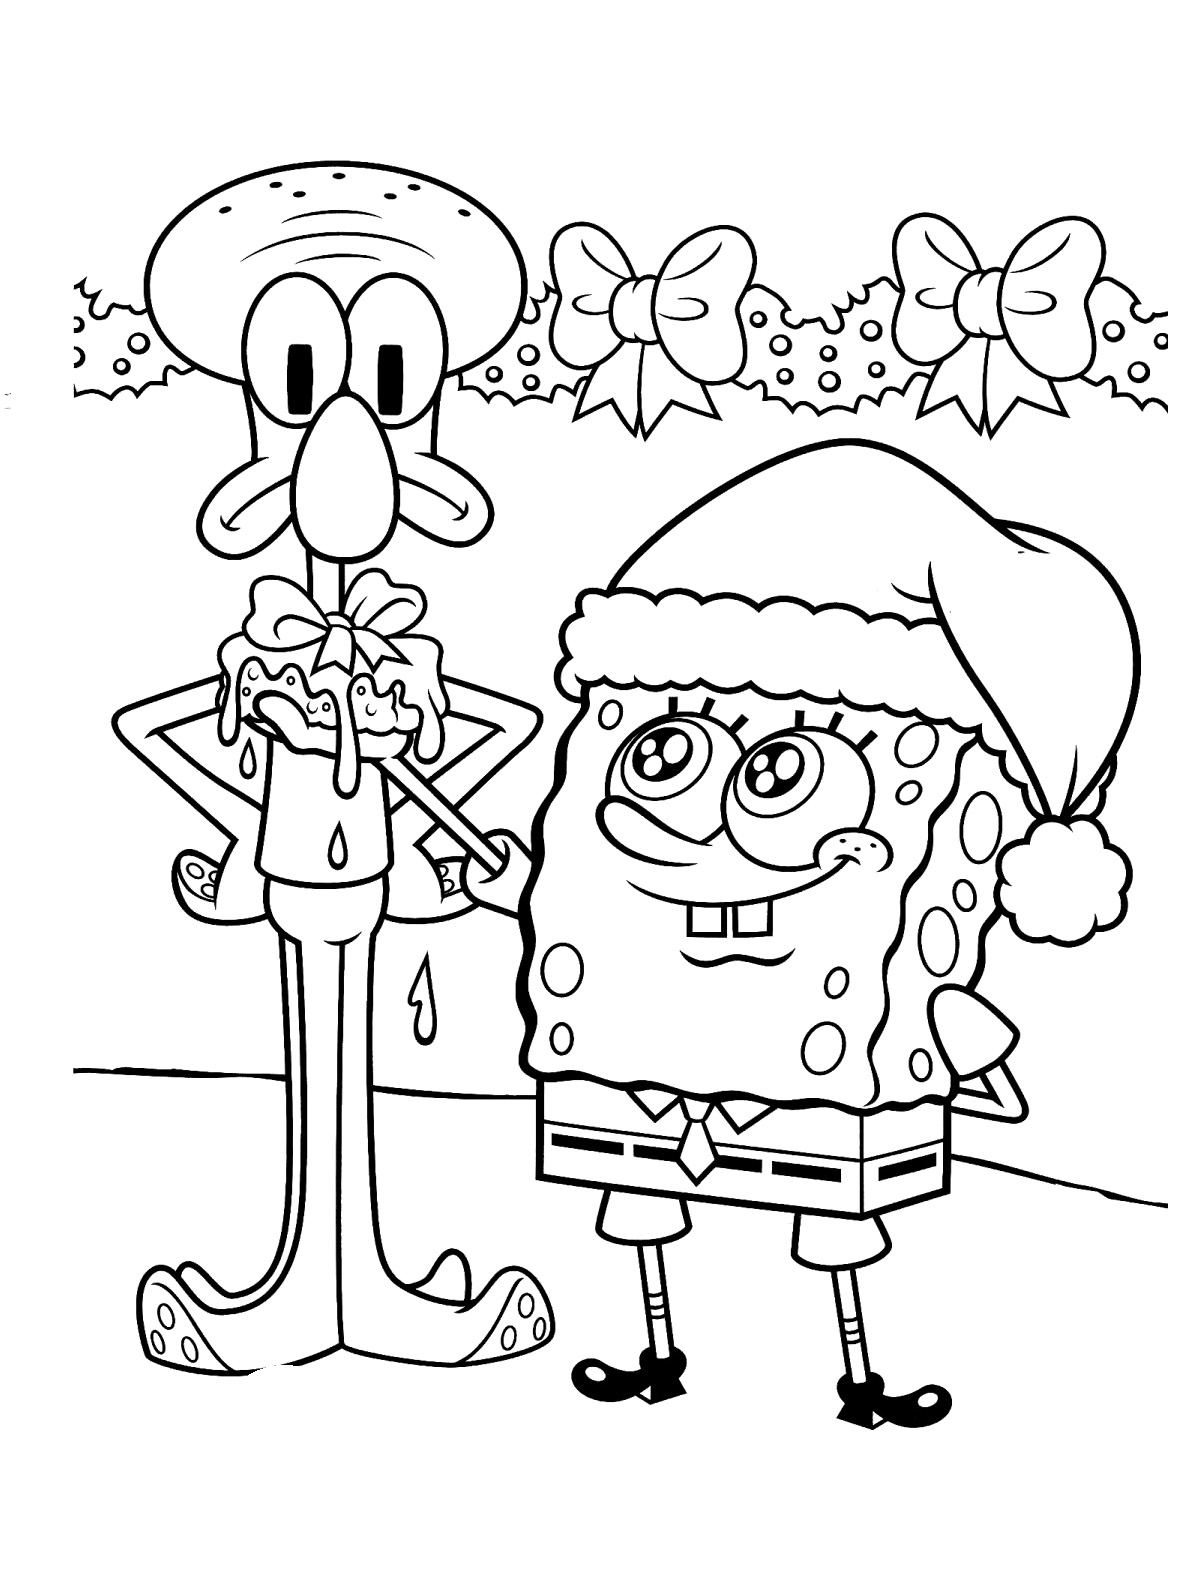 Spongebob Images To Color - Free Printable Templates